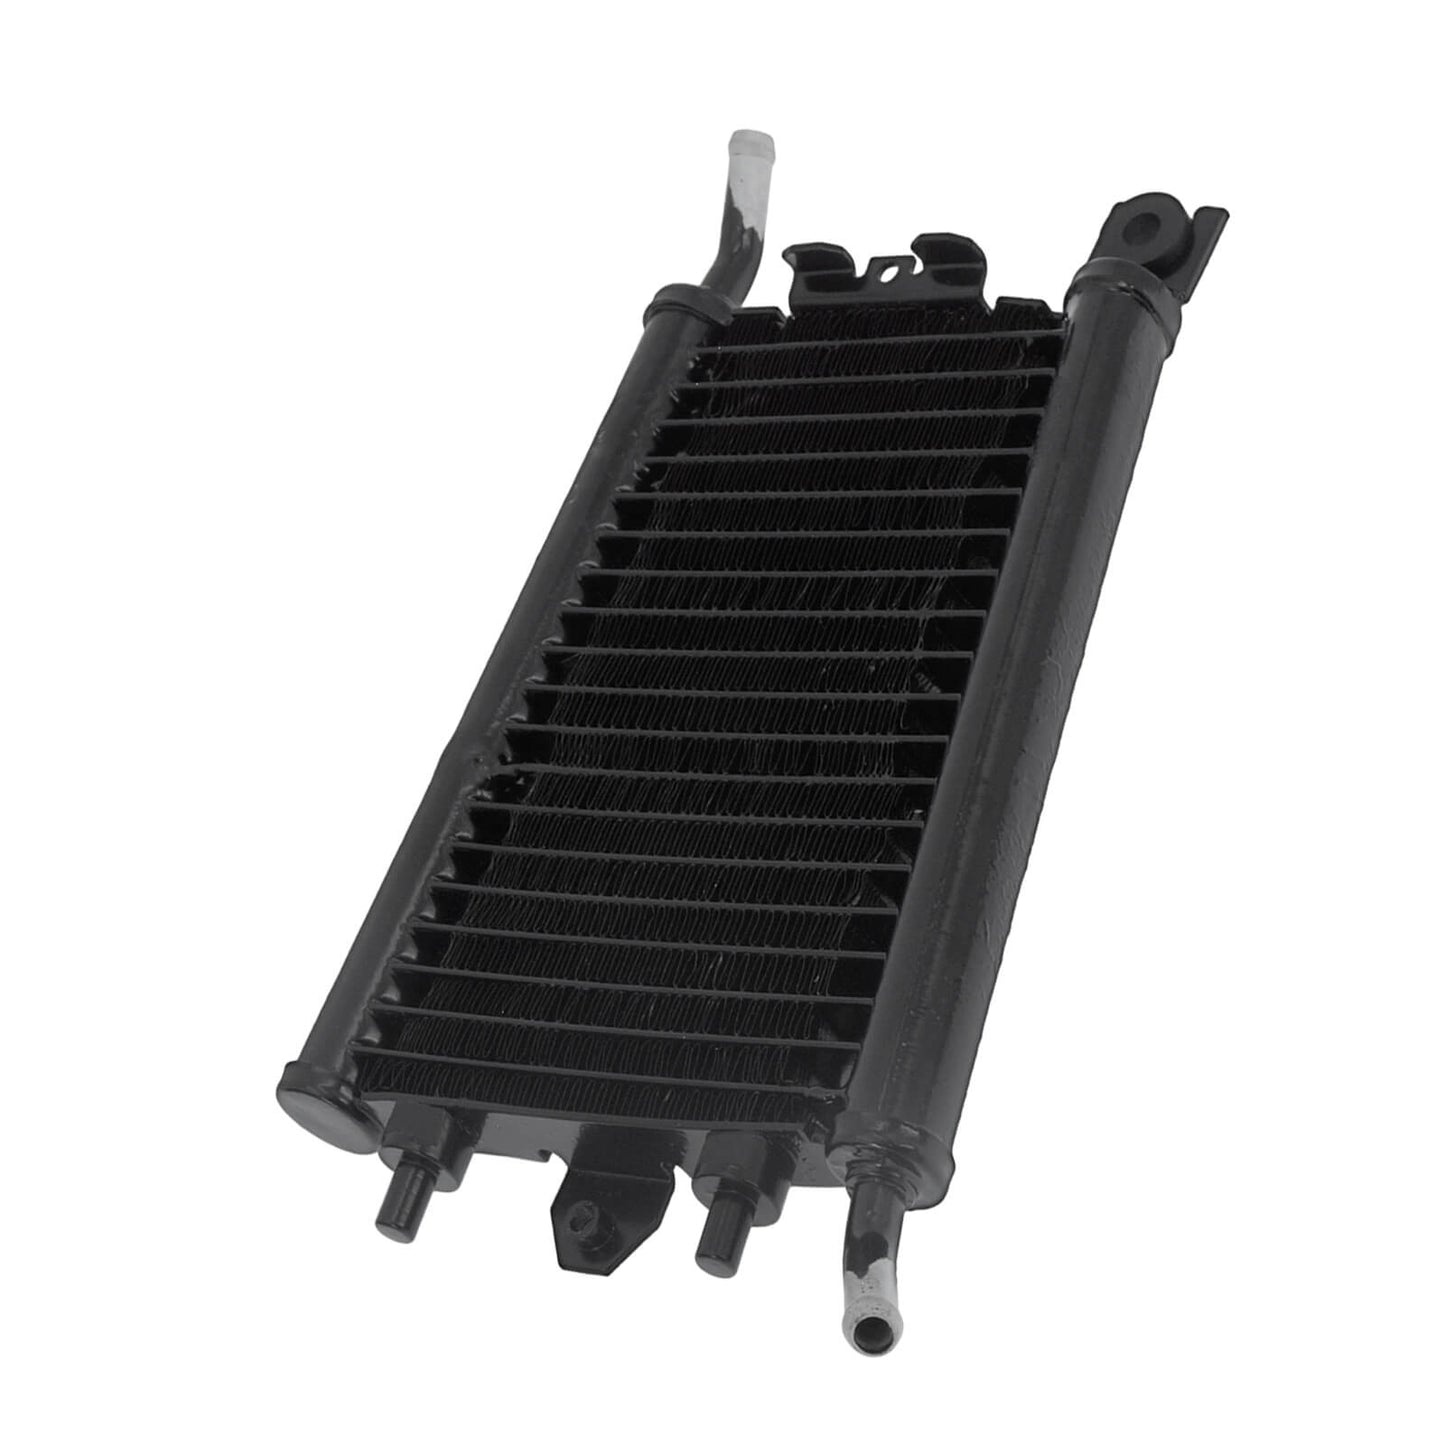 TH025701-mactions-oil-cooler-radiator-for-harley-softail-black